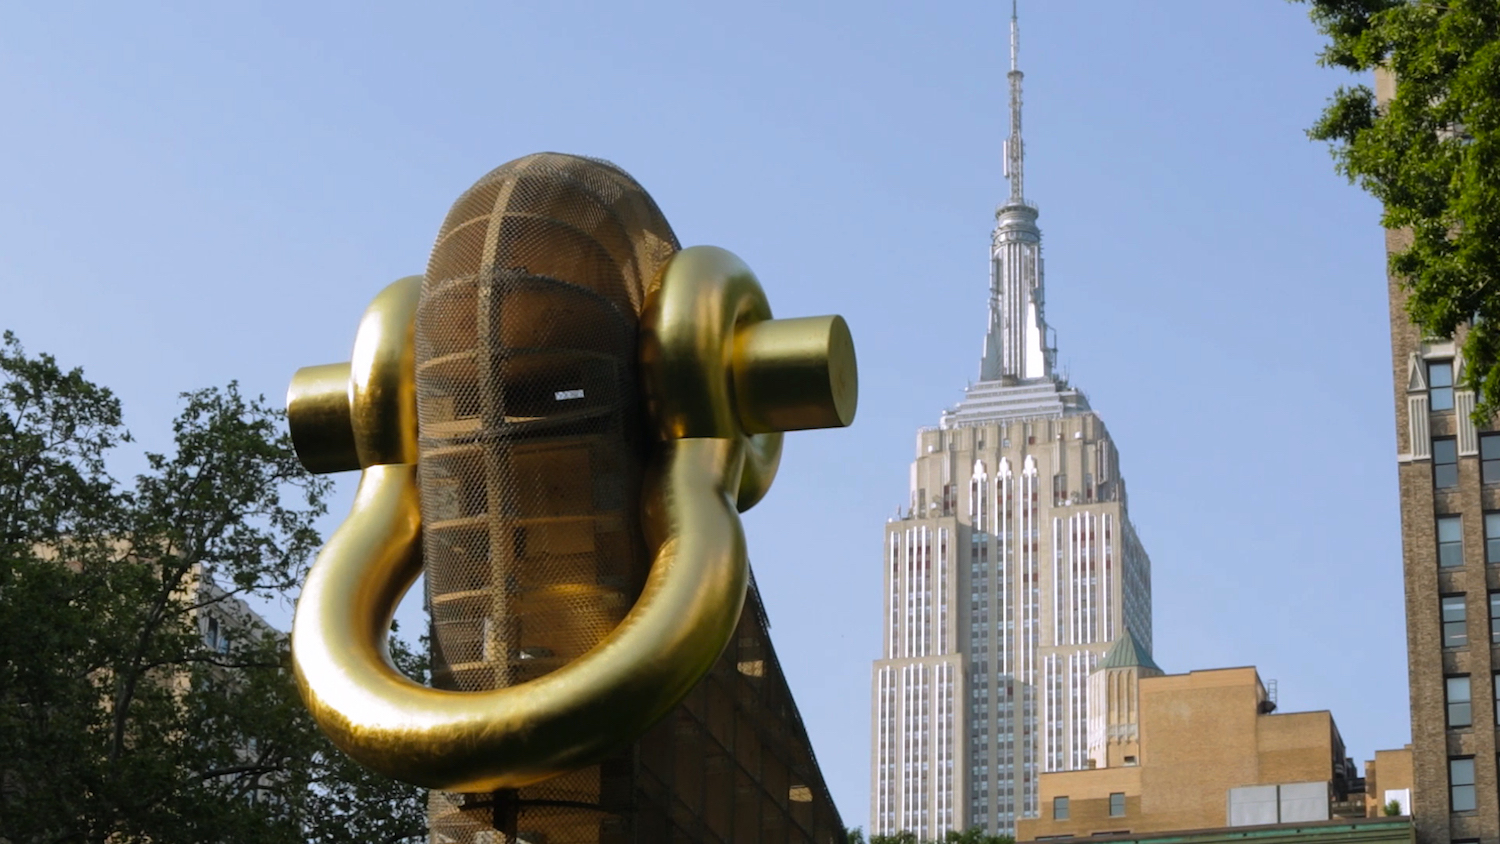 Detail of Big Bling (2016) in Madison Square Park in New York City. Production still from the series ART21 Exclusive. © ART21, Inc. 2016. Cinematography: Ian Forster.